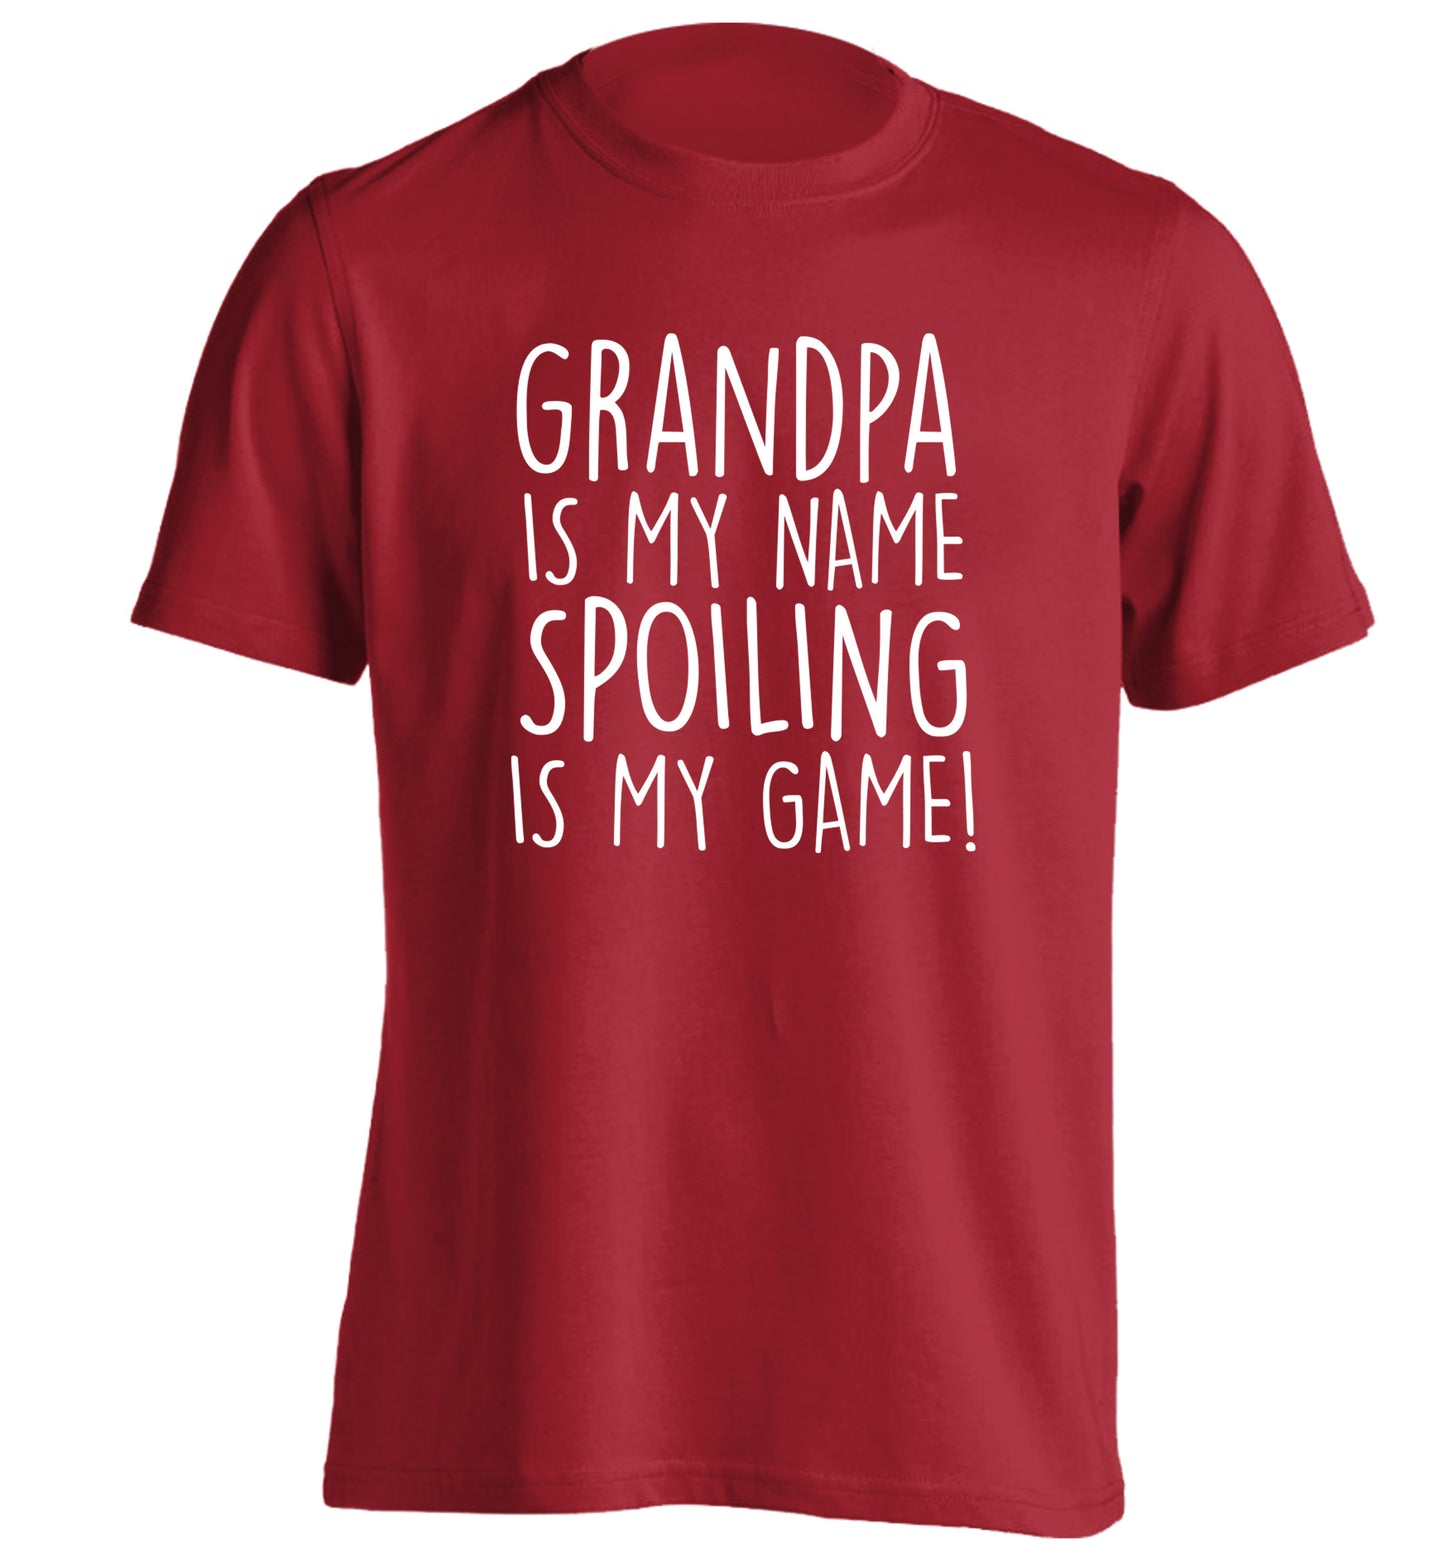 Grandpa is my name, spoiling is my game adults unisex red Tshirt 2XL